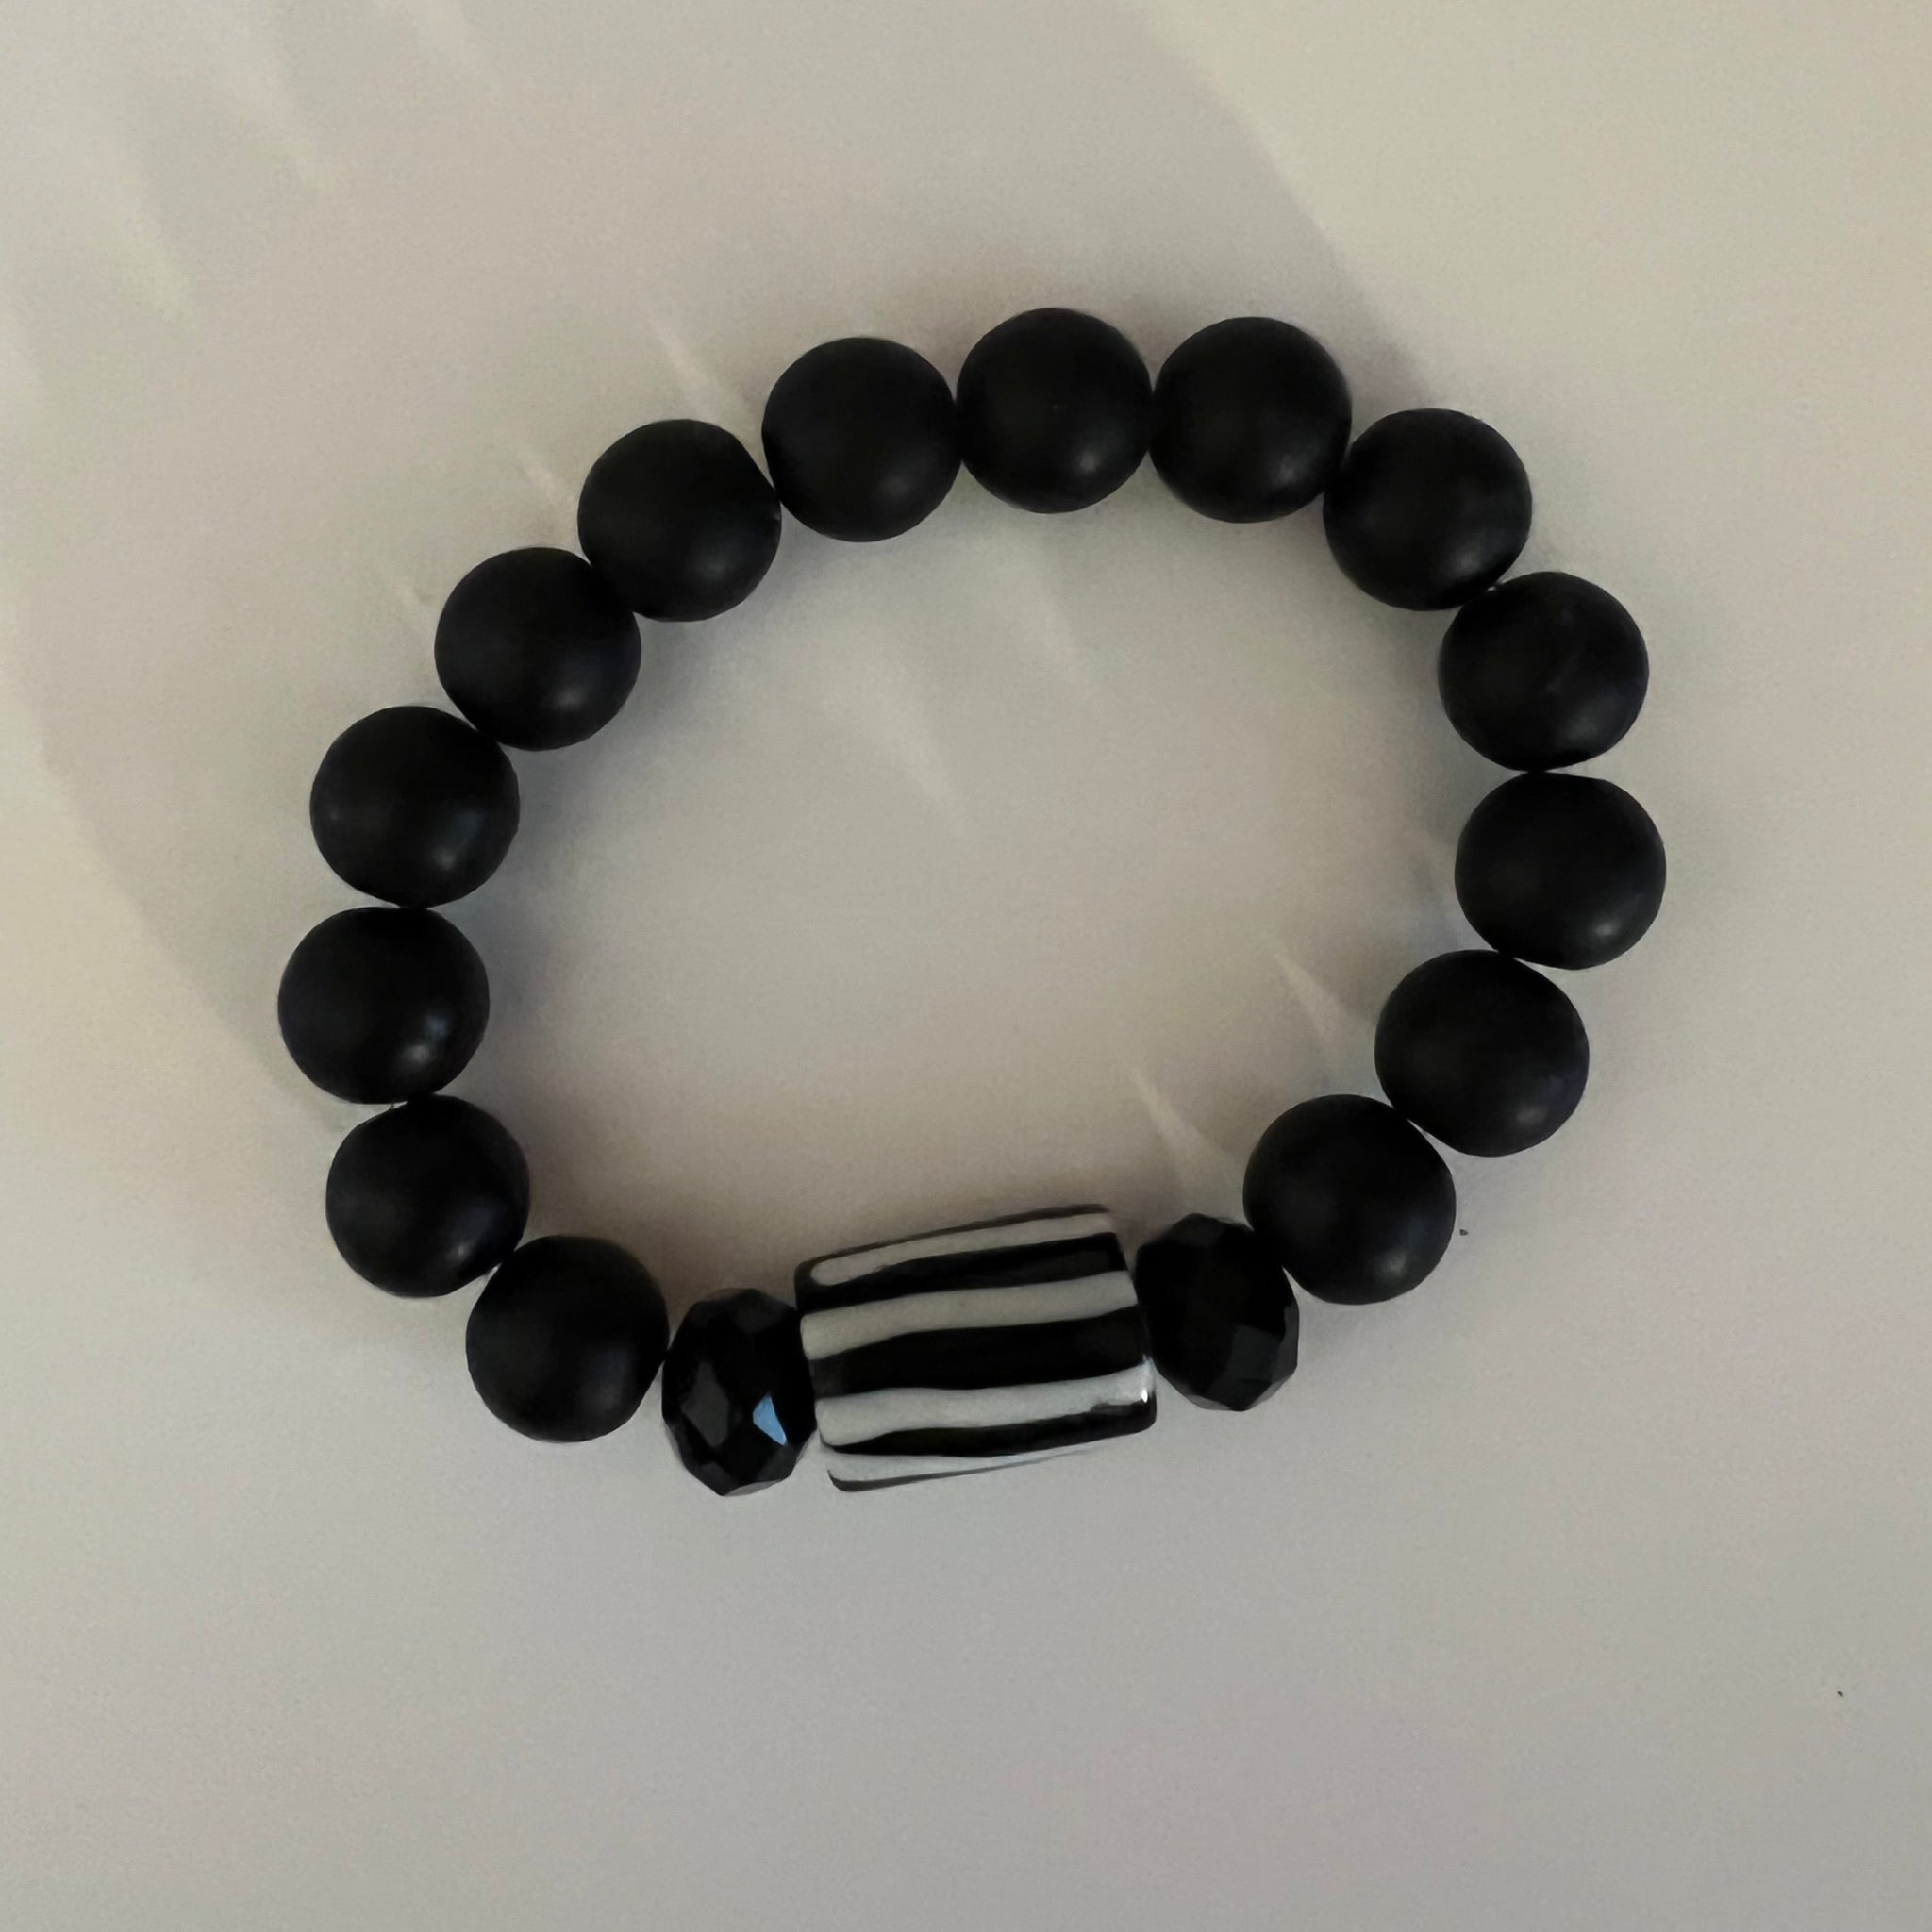 Buy DENICRAAS black and white marble matte bracelet plan at Amazon.in